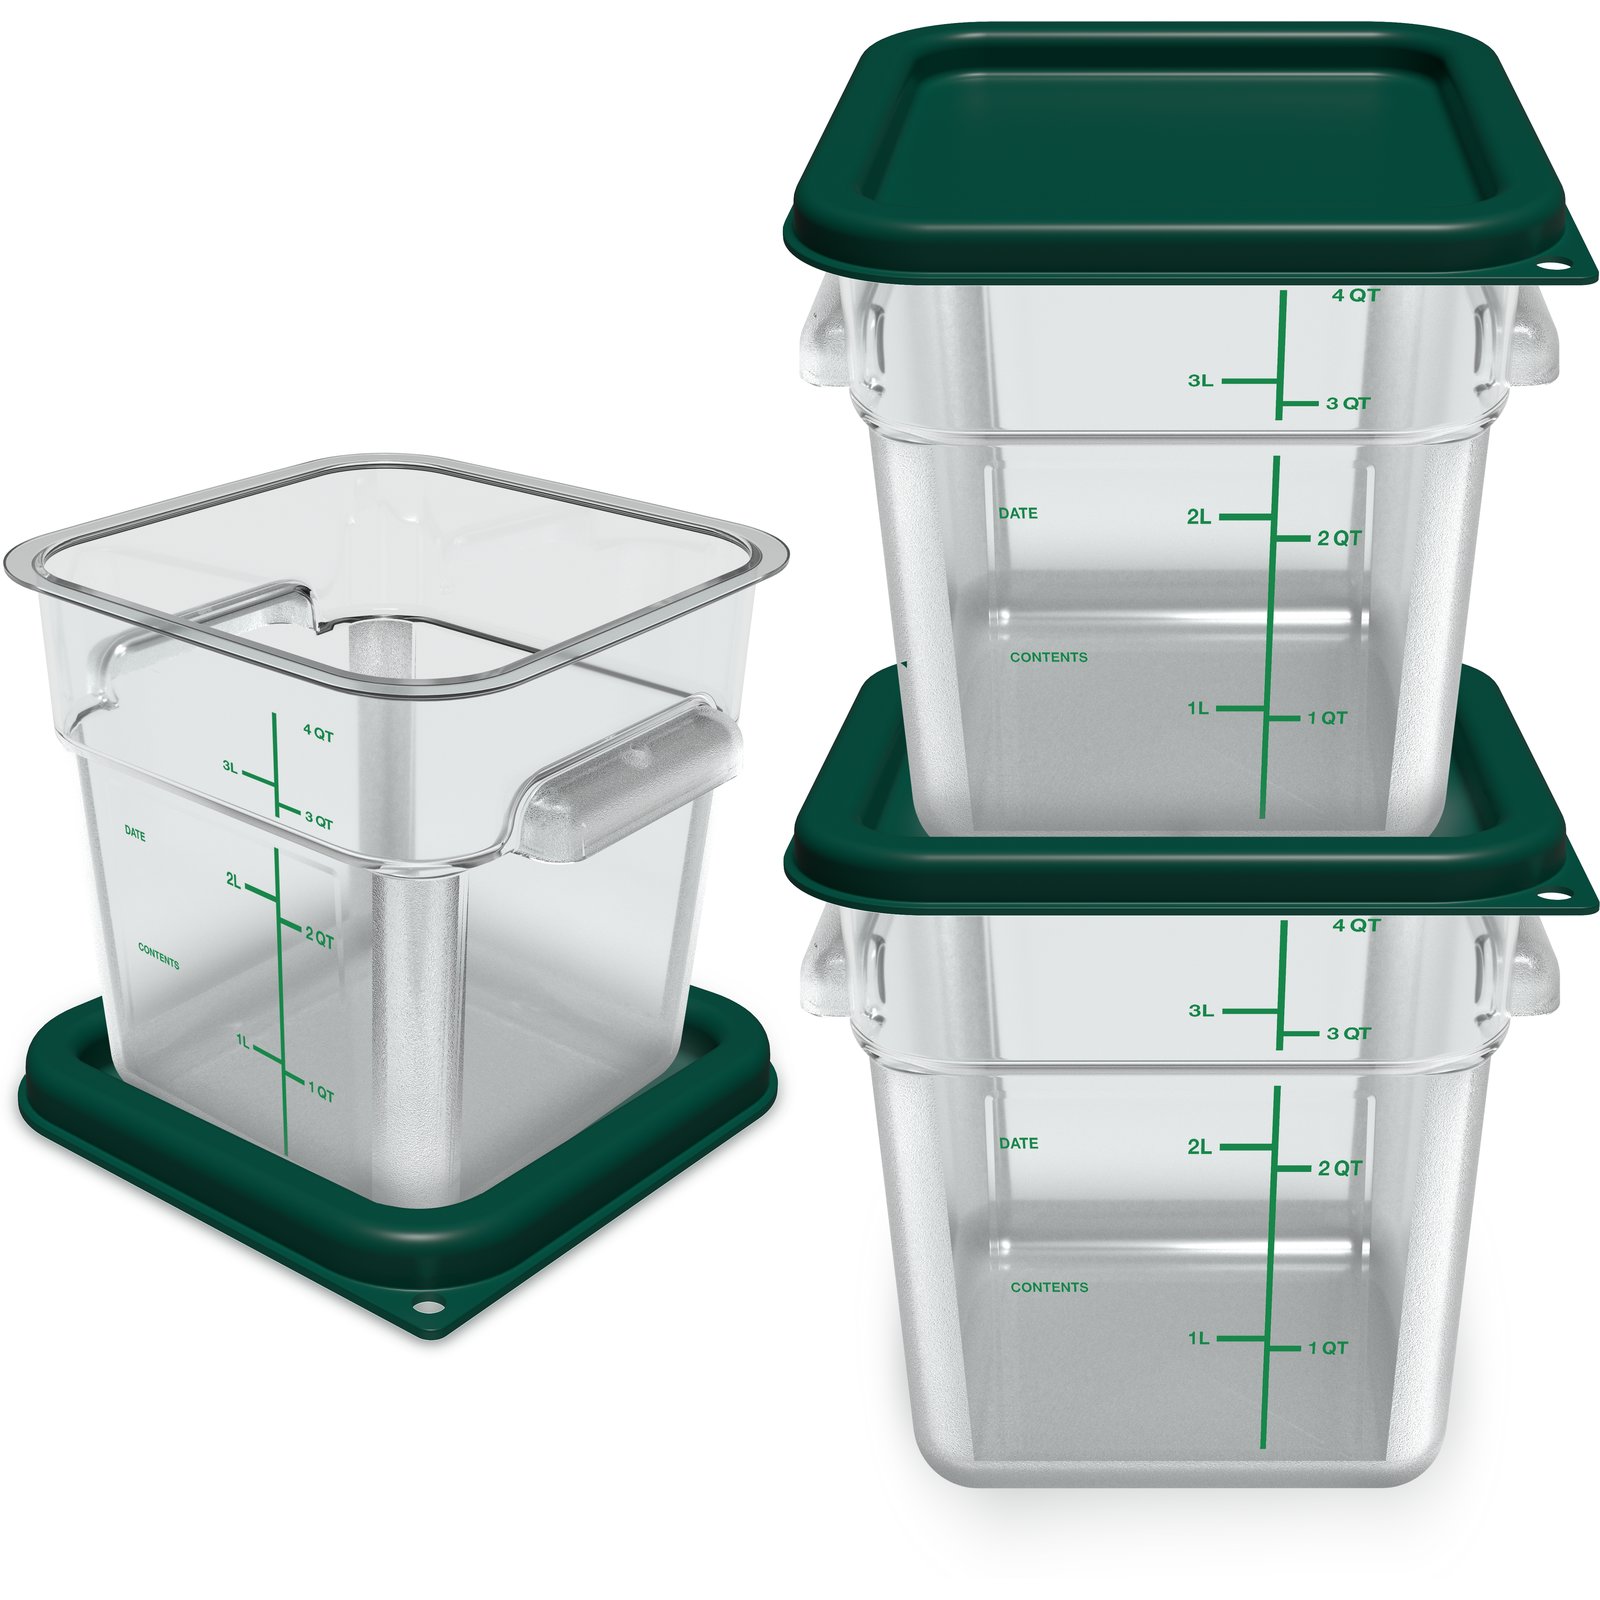 ODOMU 4 Pack Fridge Food Storage Container with Lids, Plastic